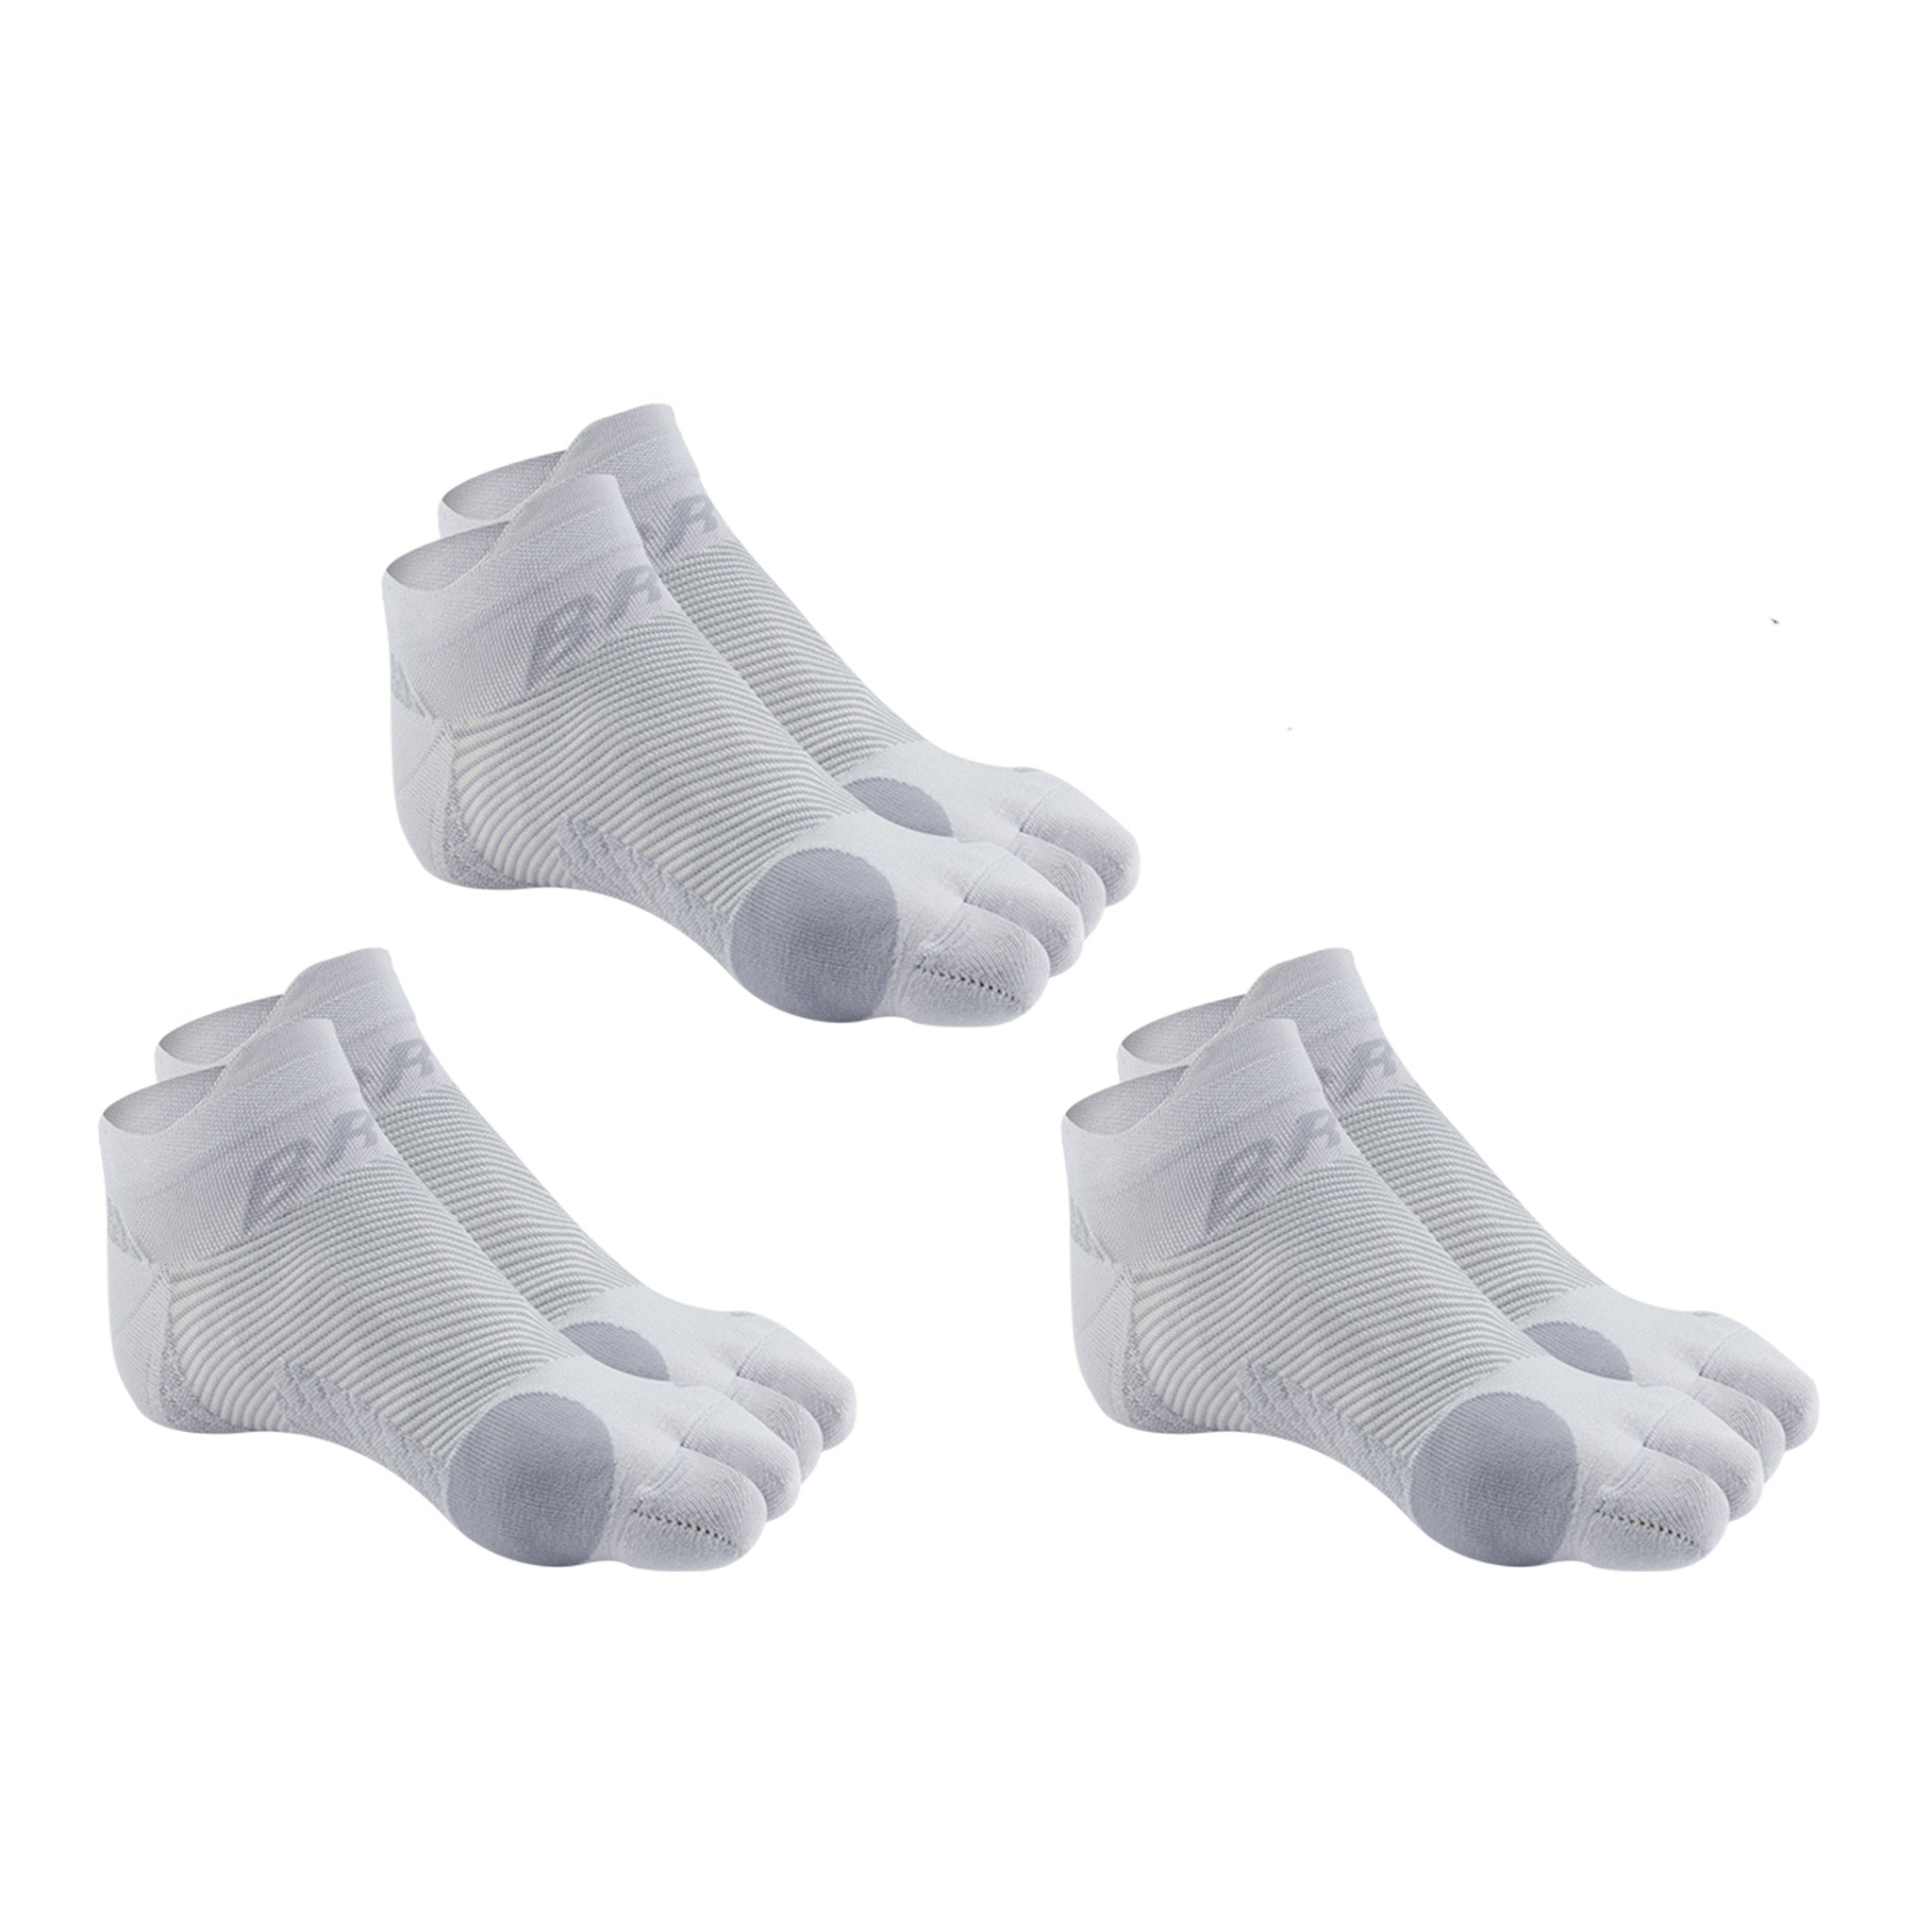 OrthoSleeve Bunion Relief Socks, Patented Split-Toe Design with a Cushioned  Bunion Pad Separates Toes, Relieves Bunion Pain and Reduces Toe Friction